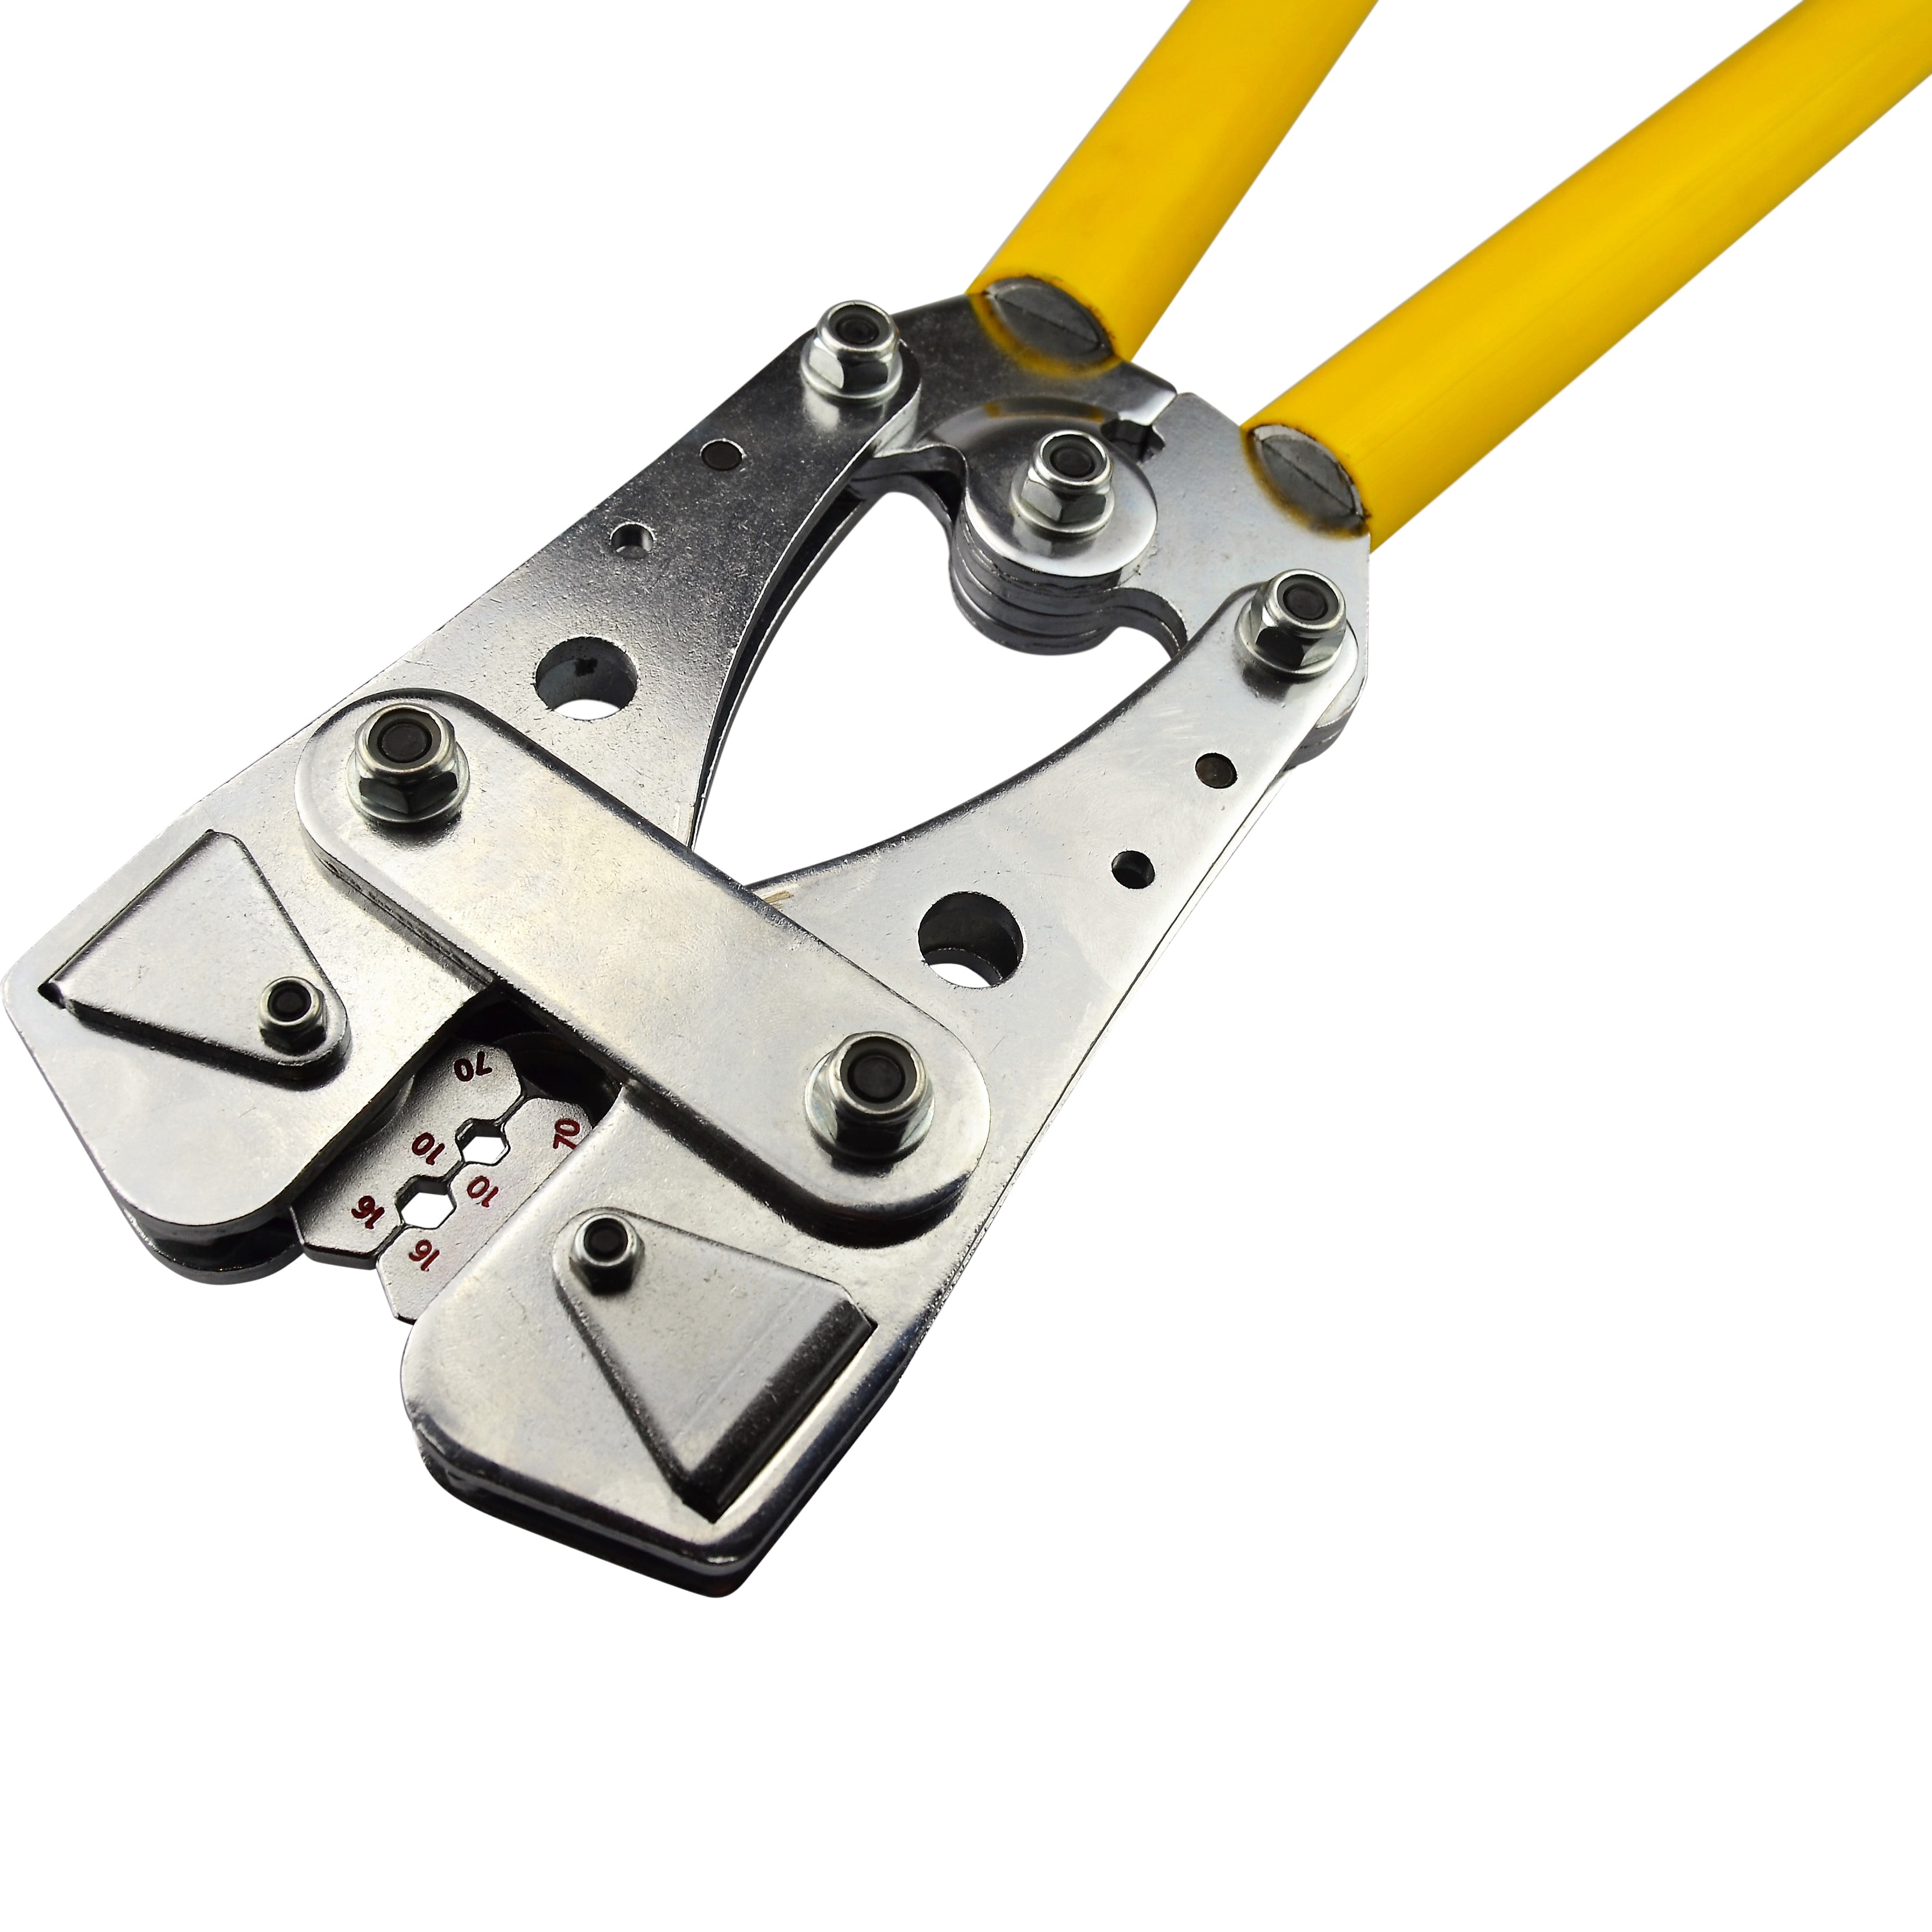 Hexagonal Crimping Tool for Copper Tube Terminals 10-120mm²